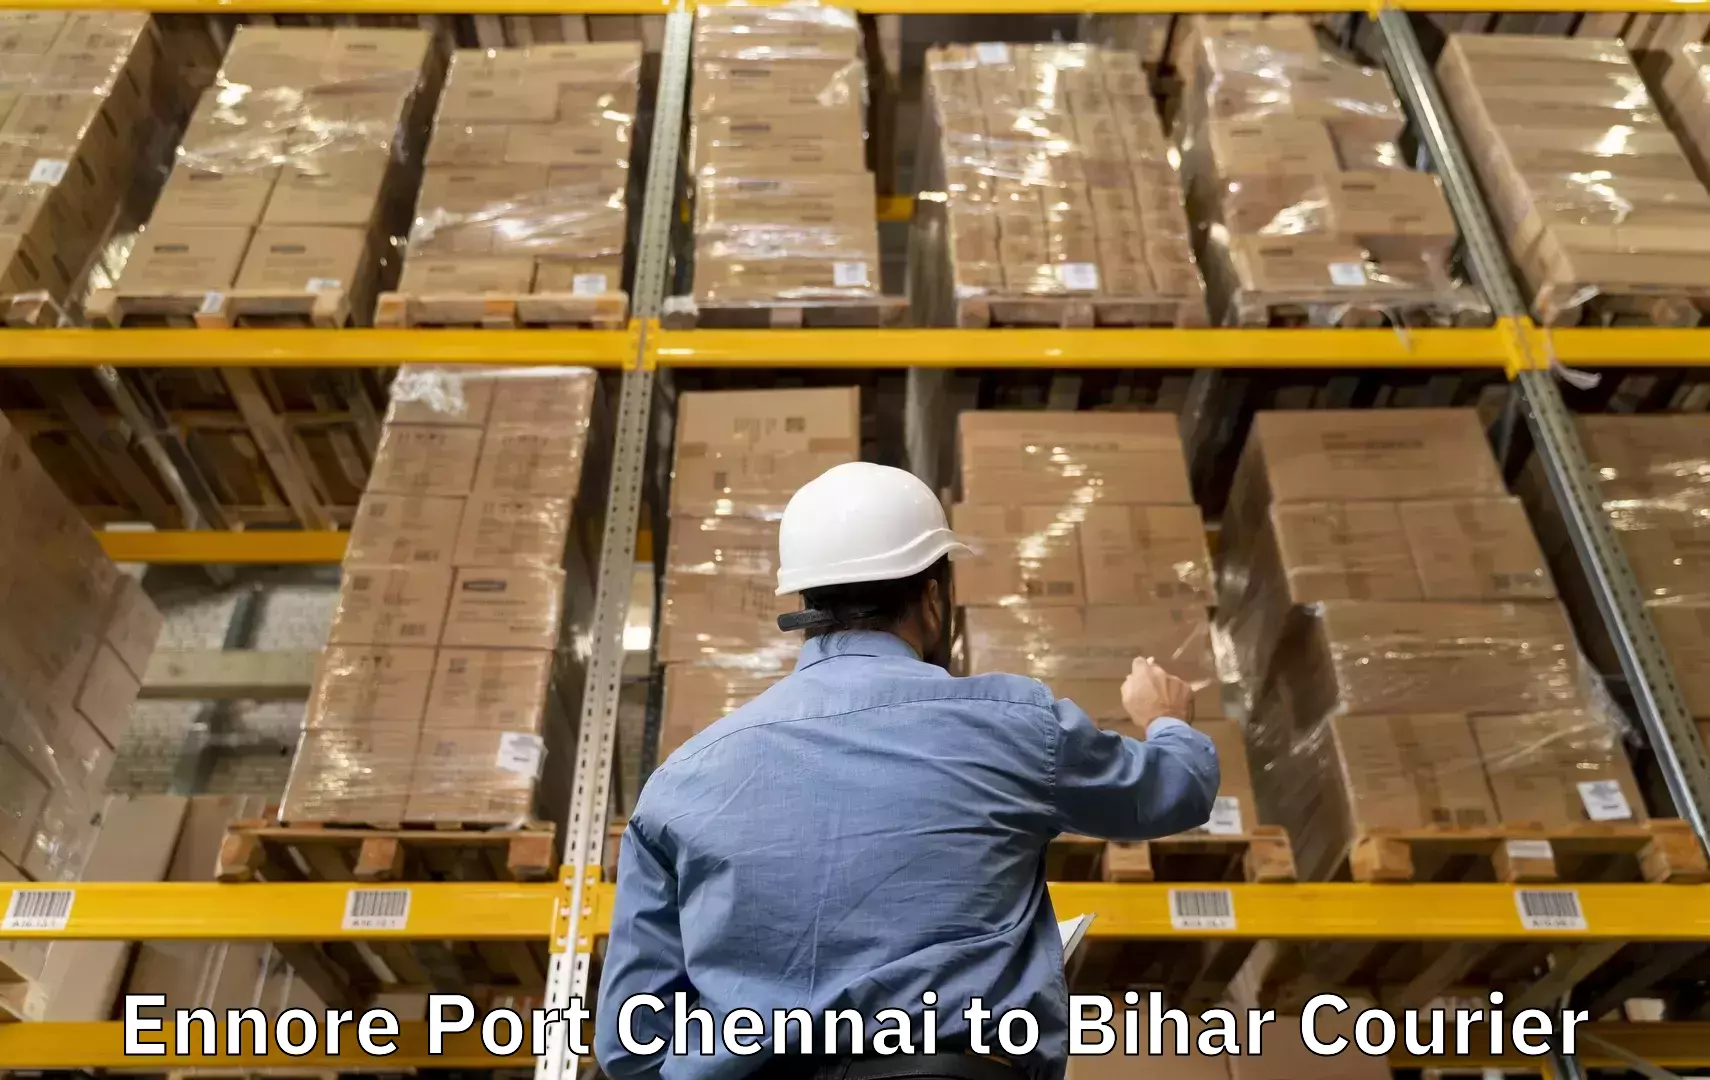 Scheduled baggage courier Ennore Port Chennai to Ekma